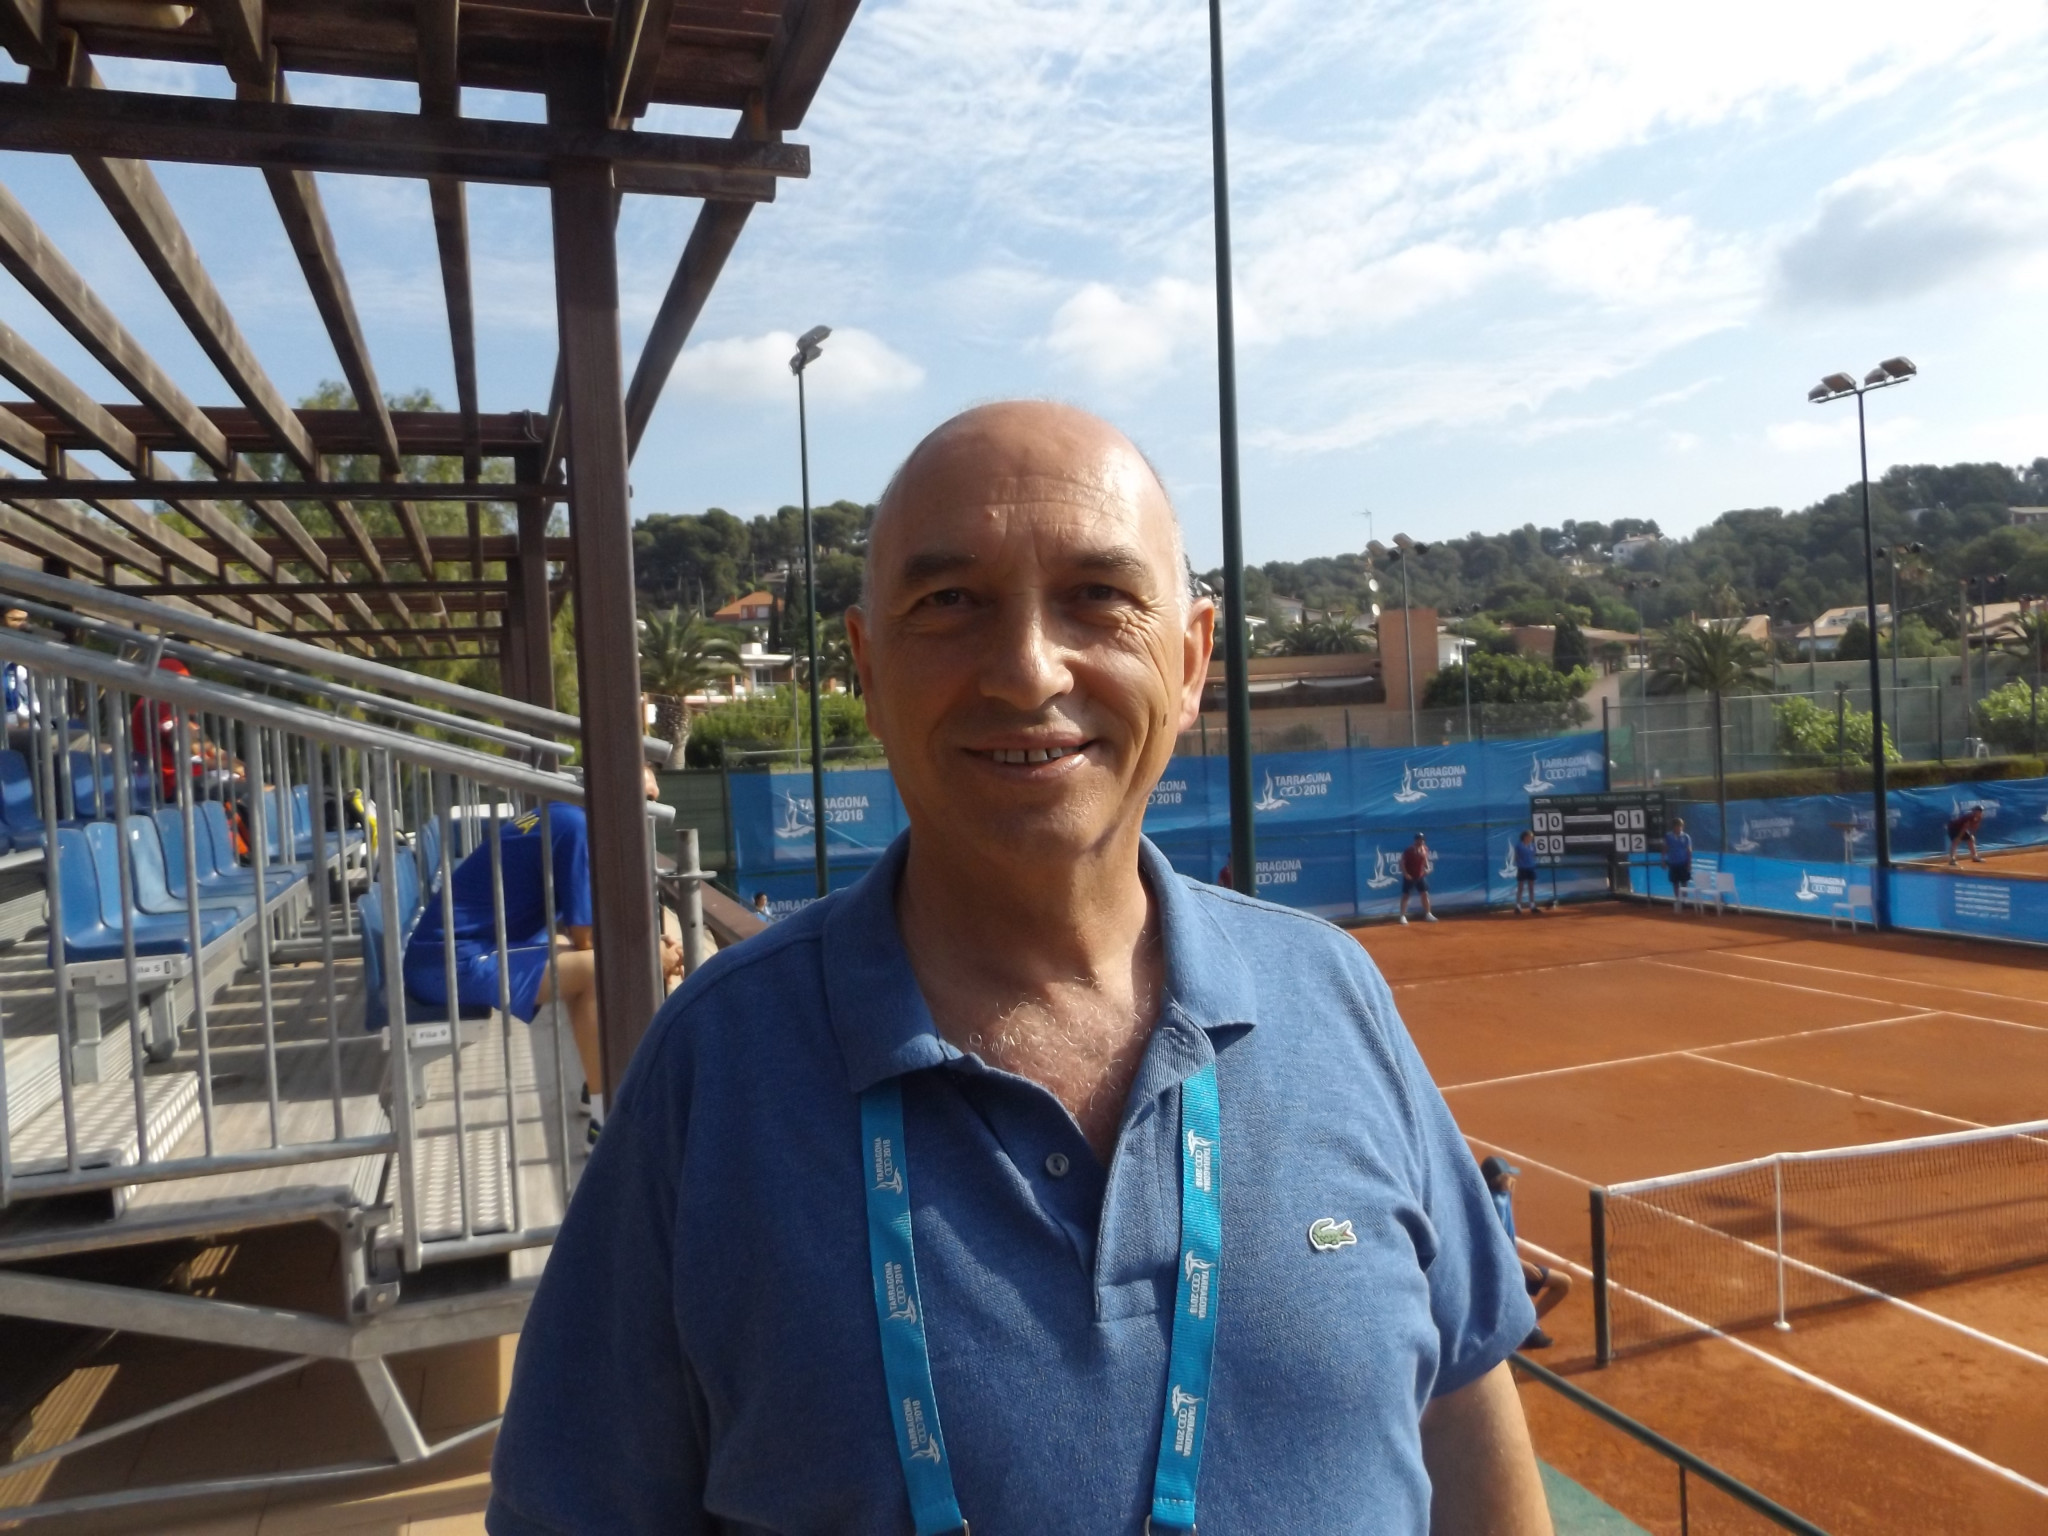 Kosovo National Olympic Committee President Besim Hasani is enjoying his country's first experience of the Mediterranean Games but is hoping for some medals ©ITG